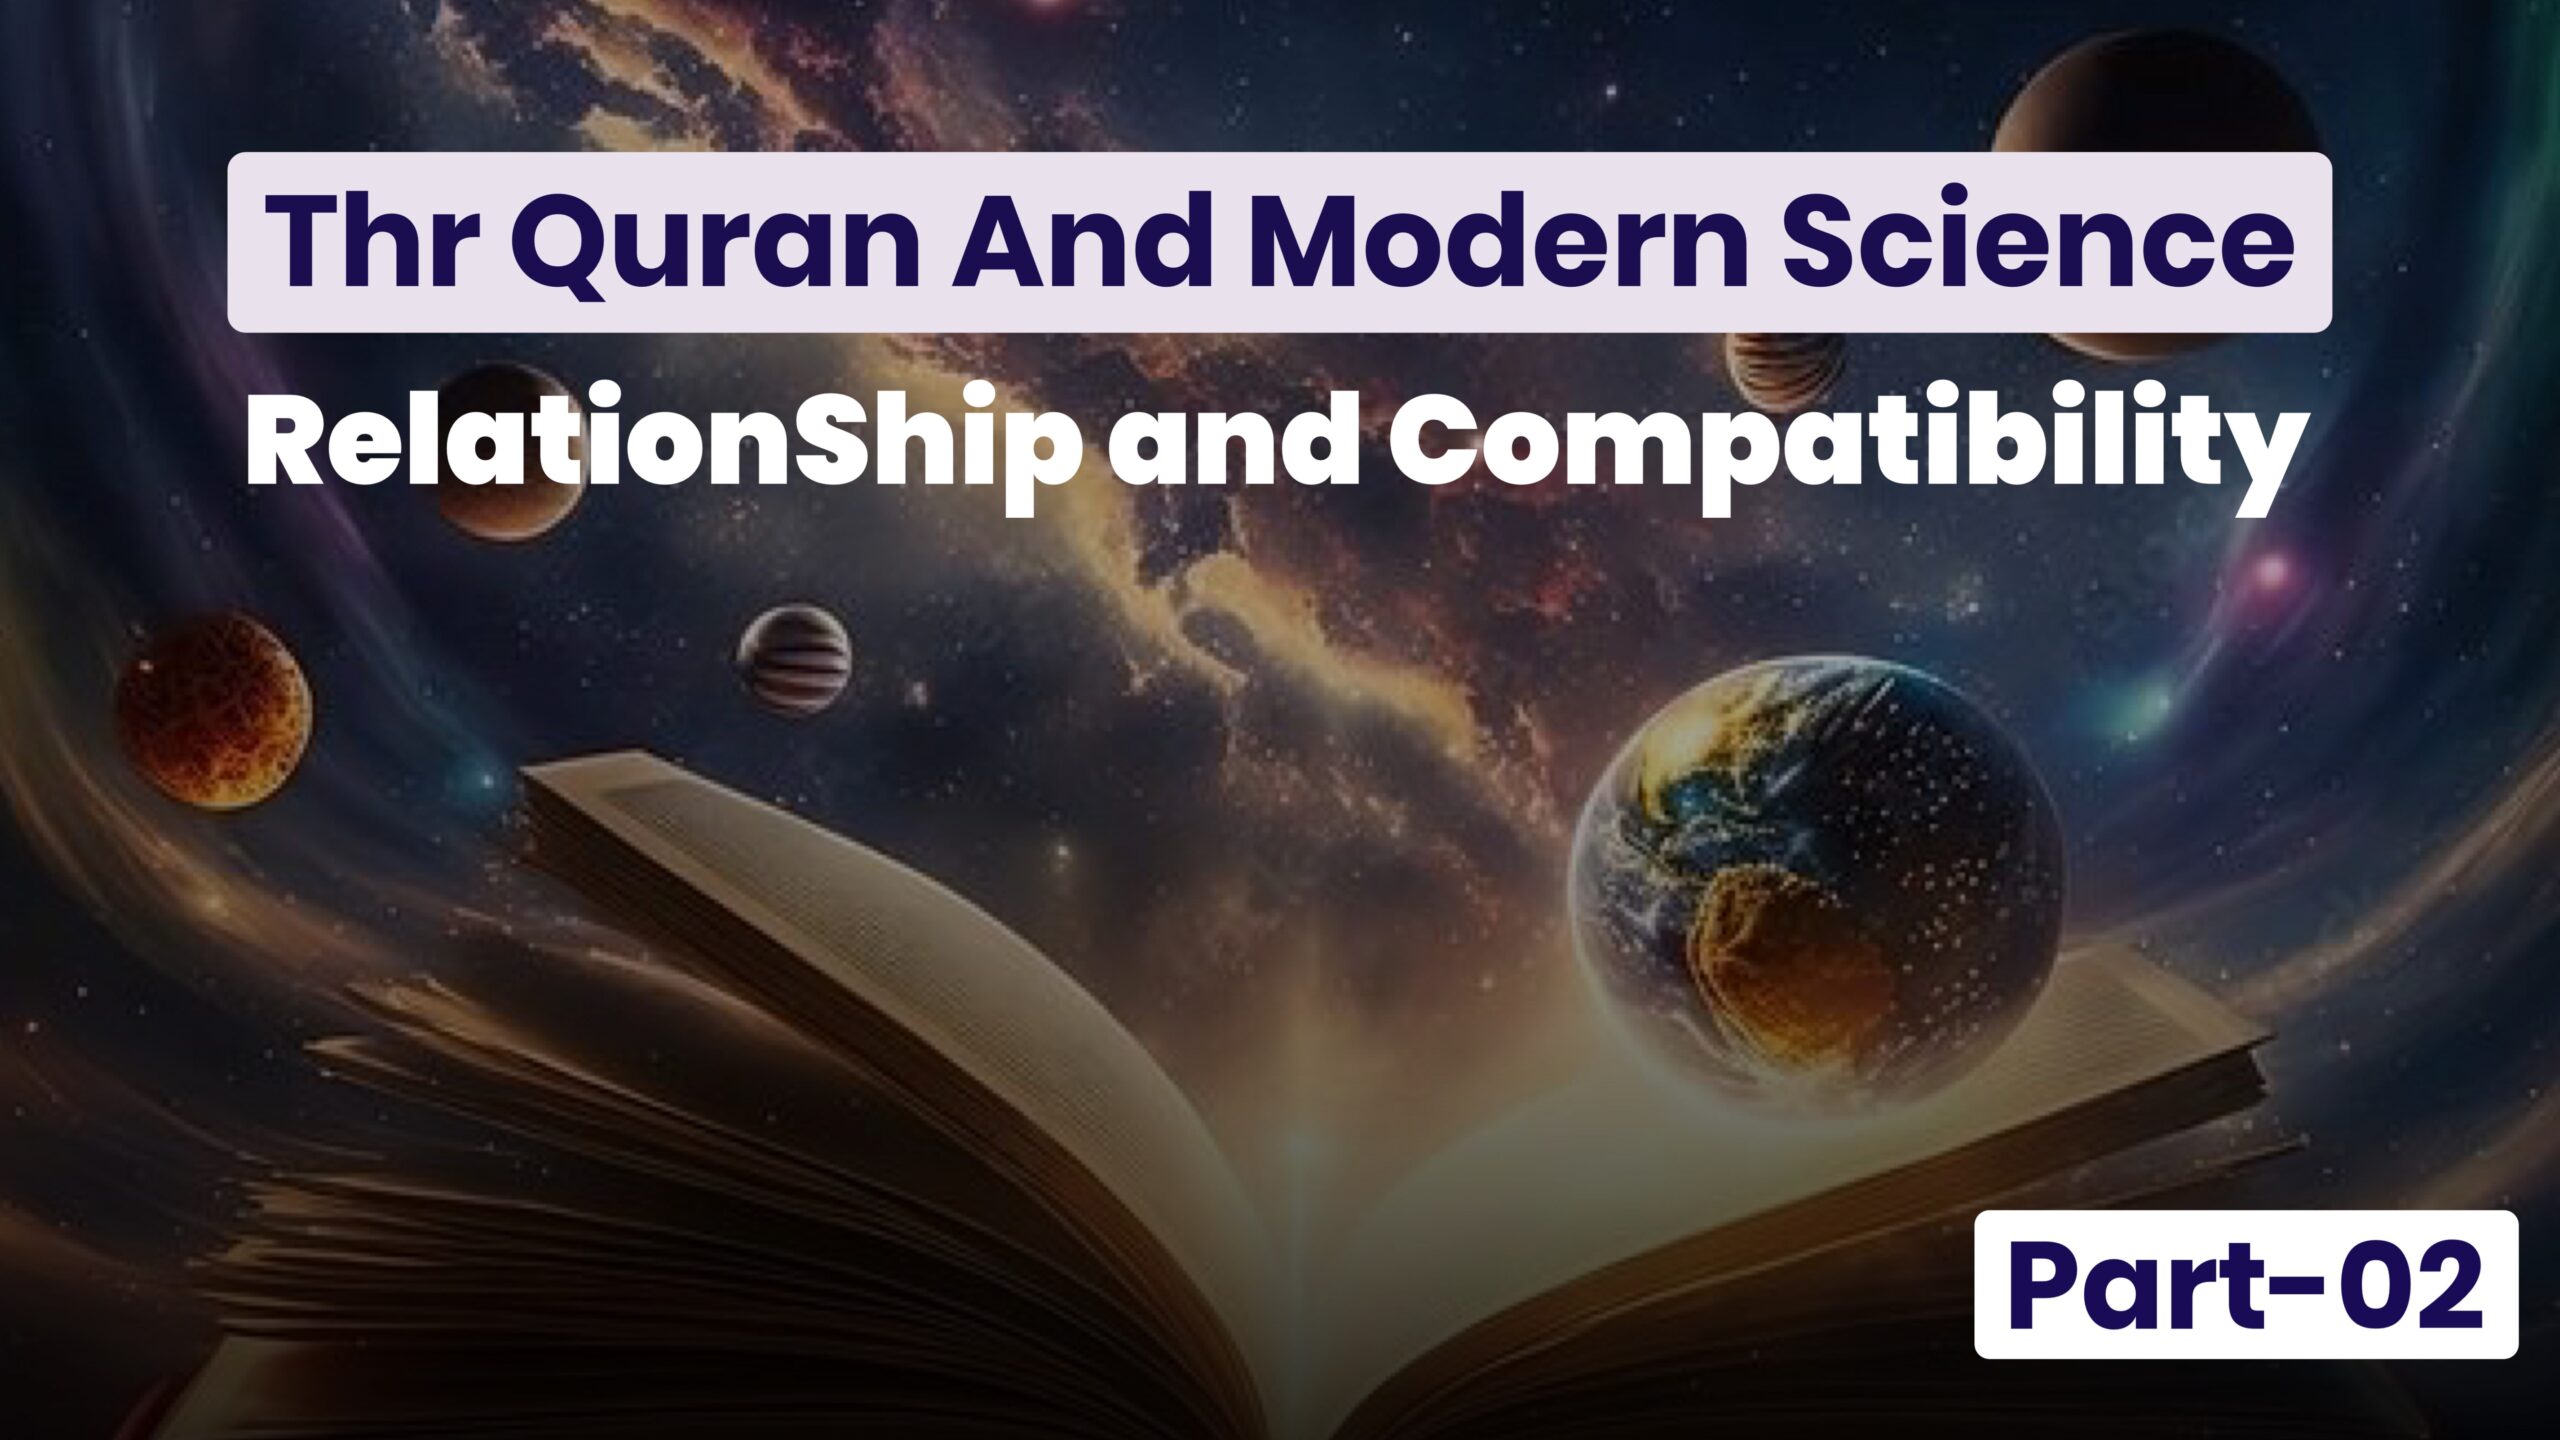 The Quran and Modern Science: Relationship and Compatibility Part-02